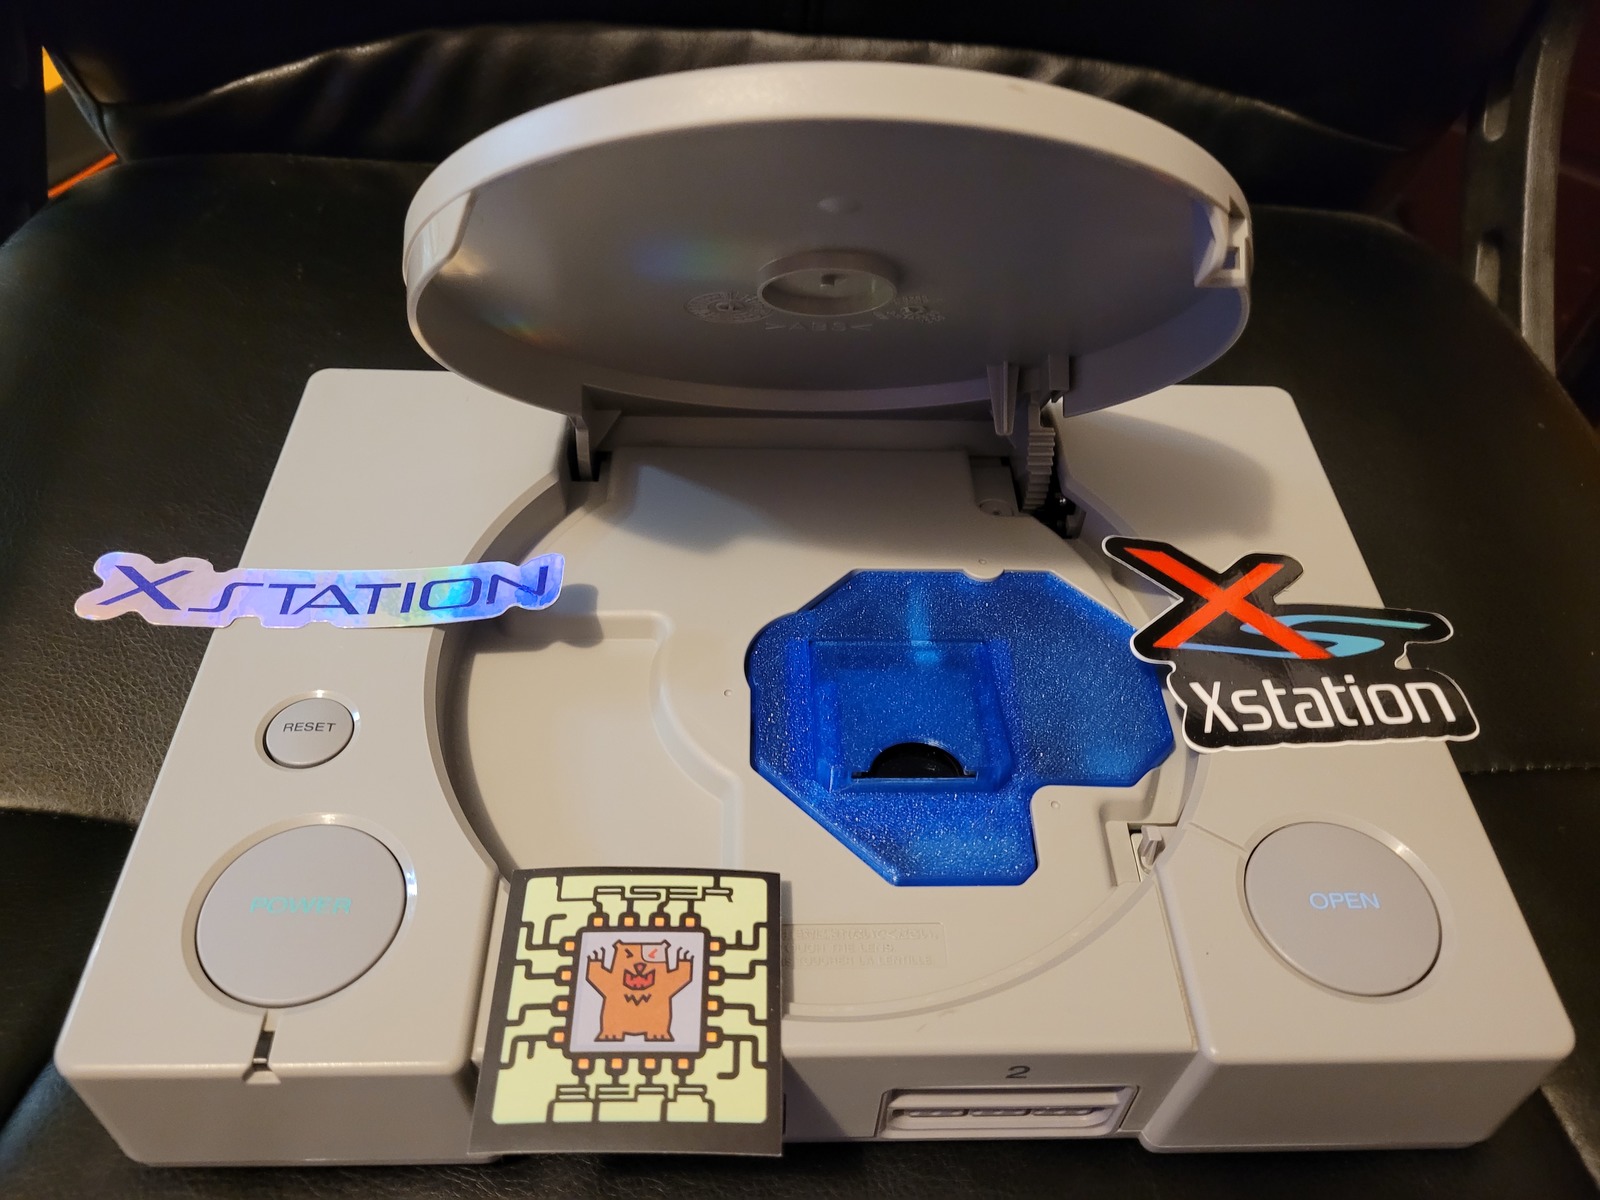 Playstation 1 w/ XStation! Blue Mount! In and 30 similar items